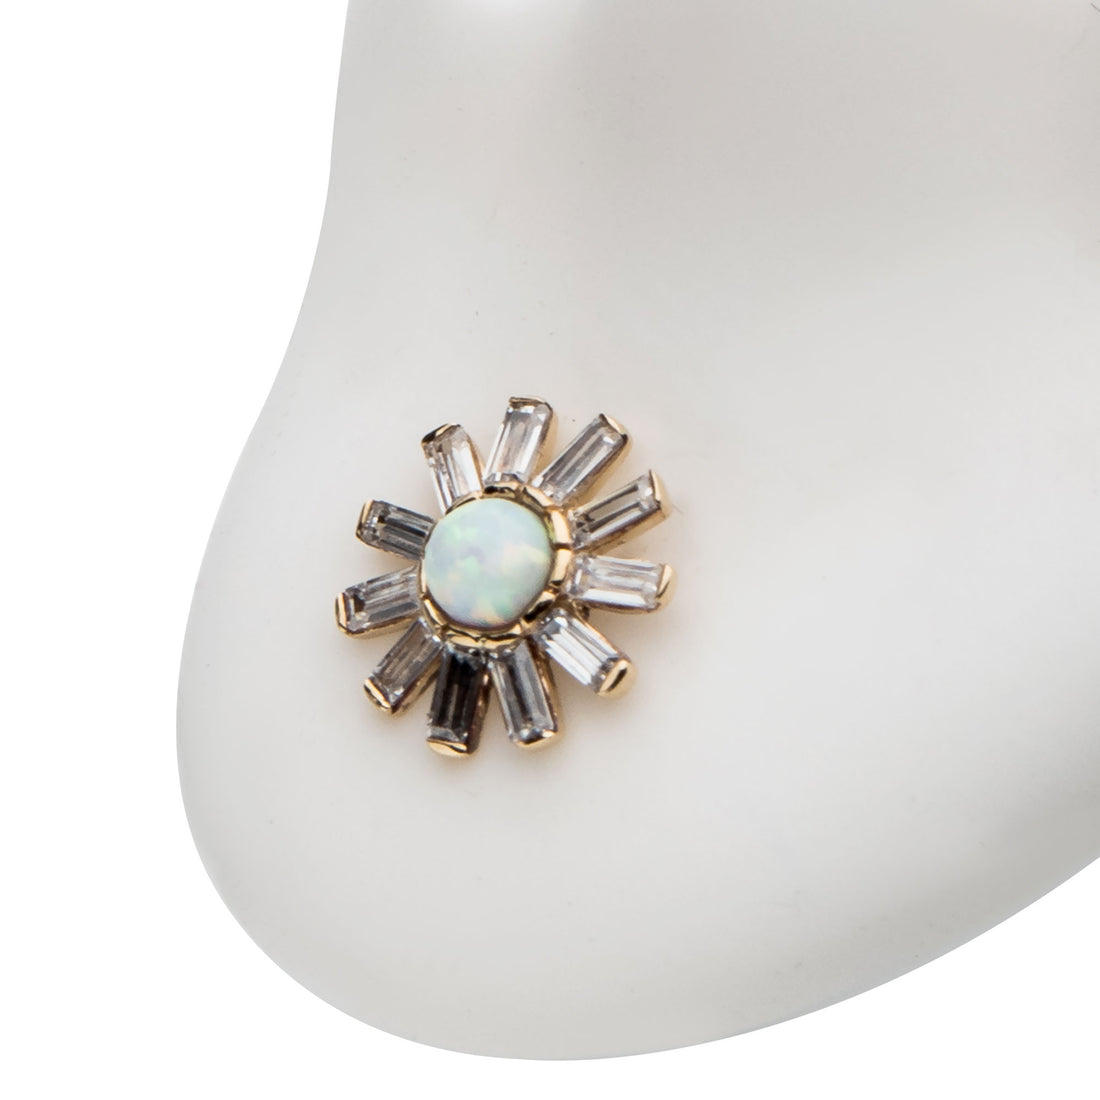 14kt Yellow Gold Threadless White Synthetic Opal & Tapered Baguette Clear CZ Sunburst Top